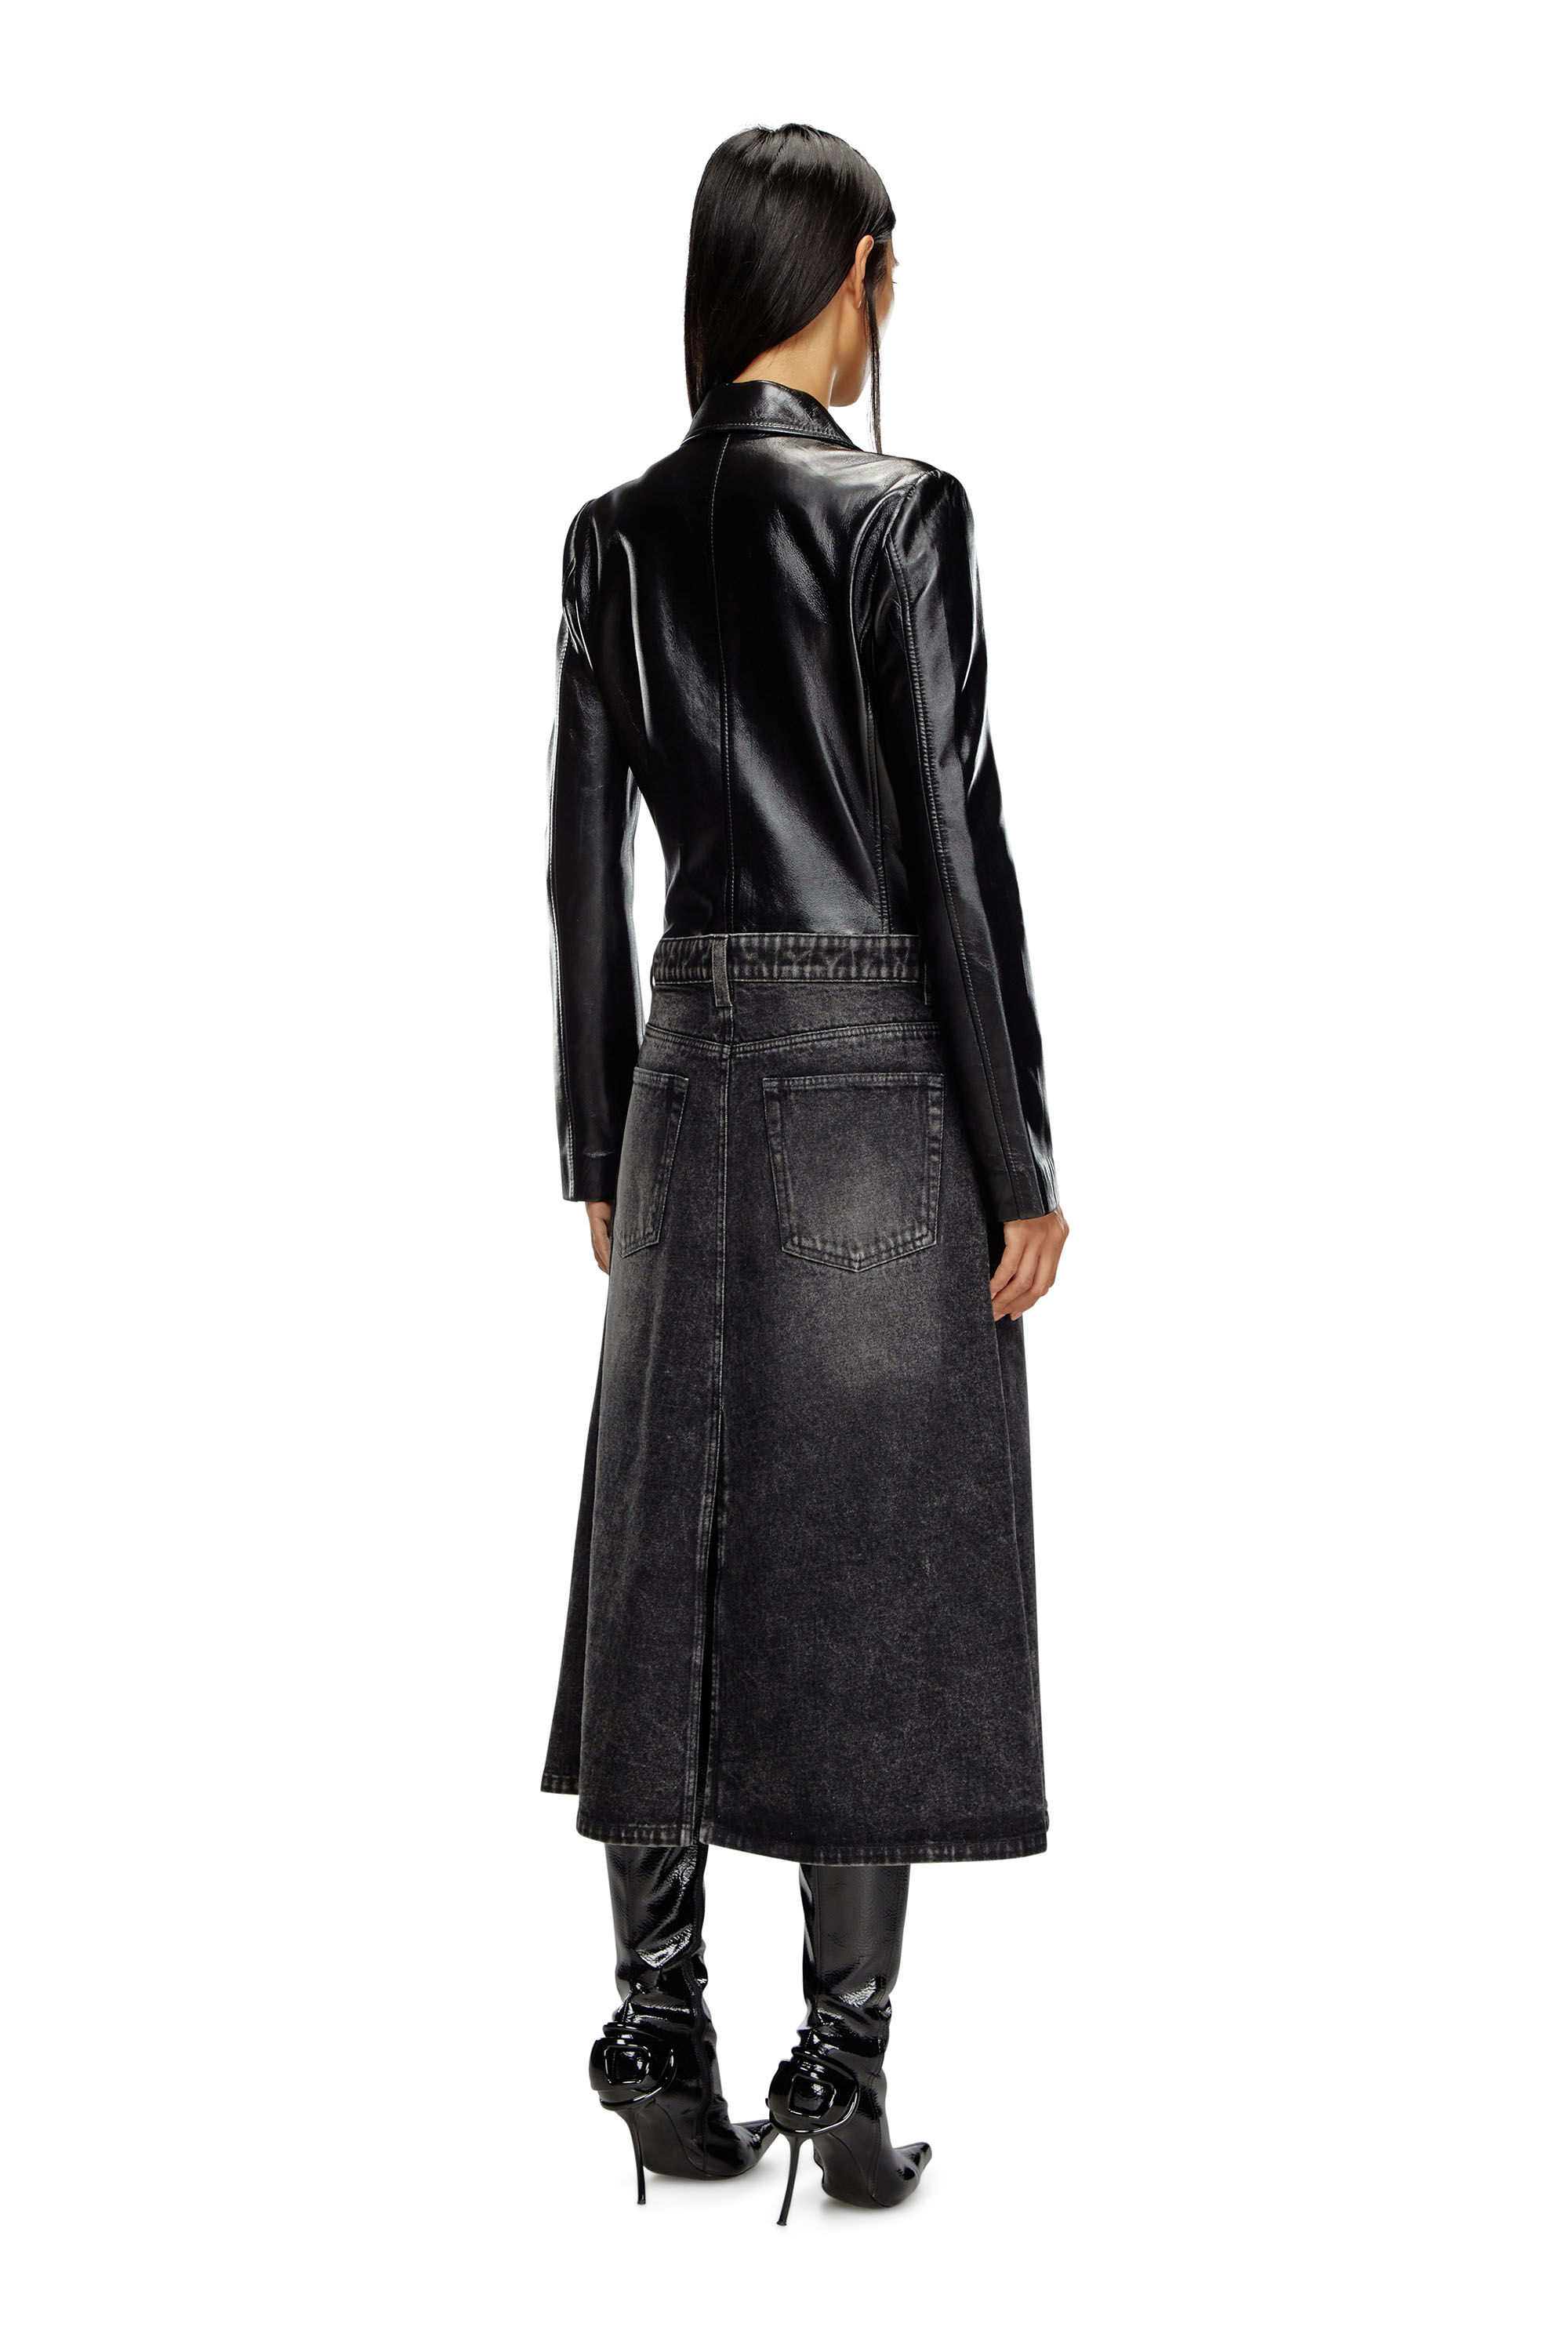 Diesel - L-ORY, Woman Hybrid coat in denim and leather in Black - Image 5